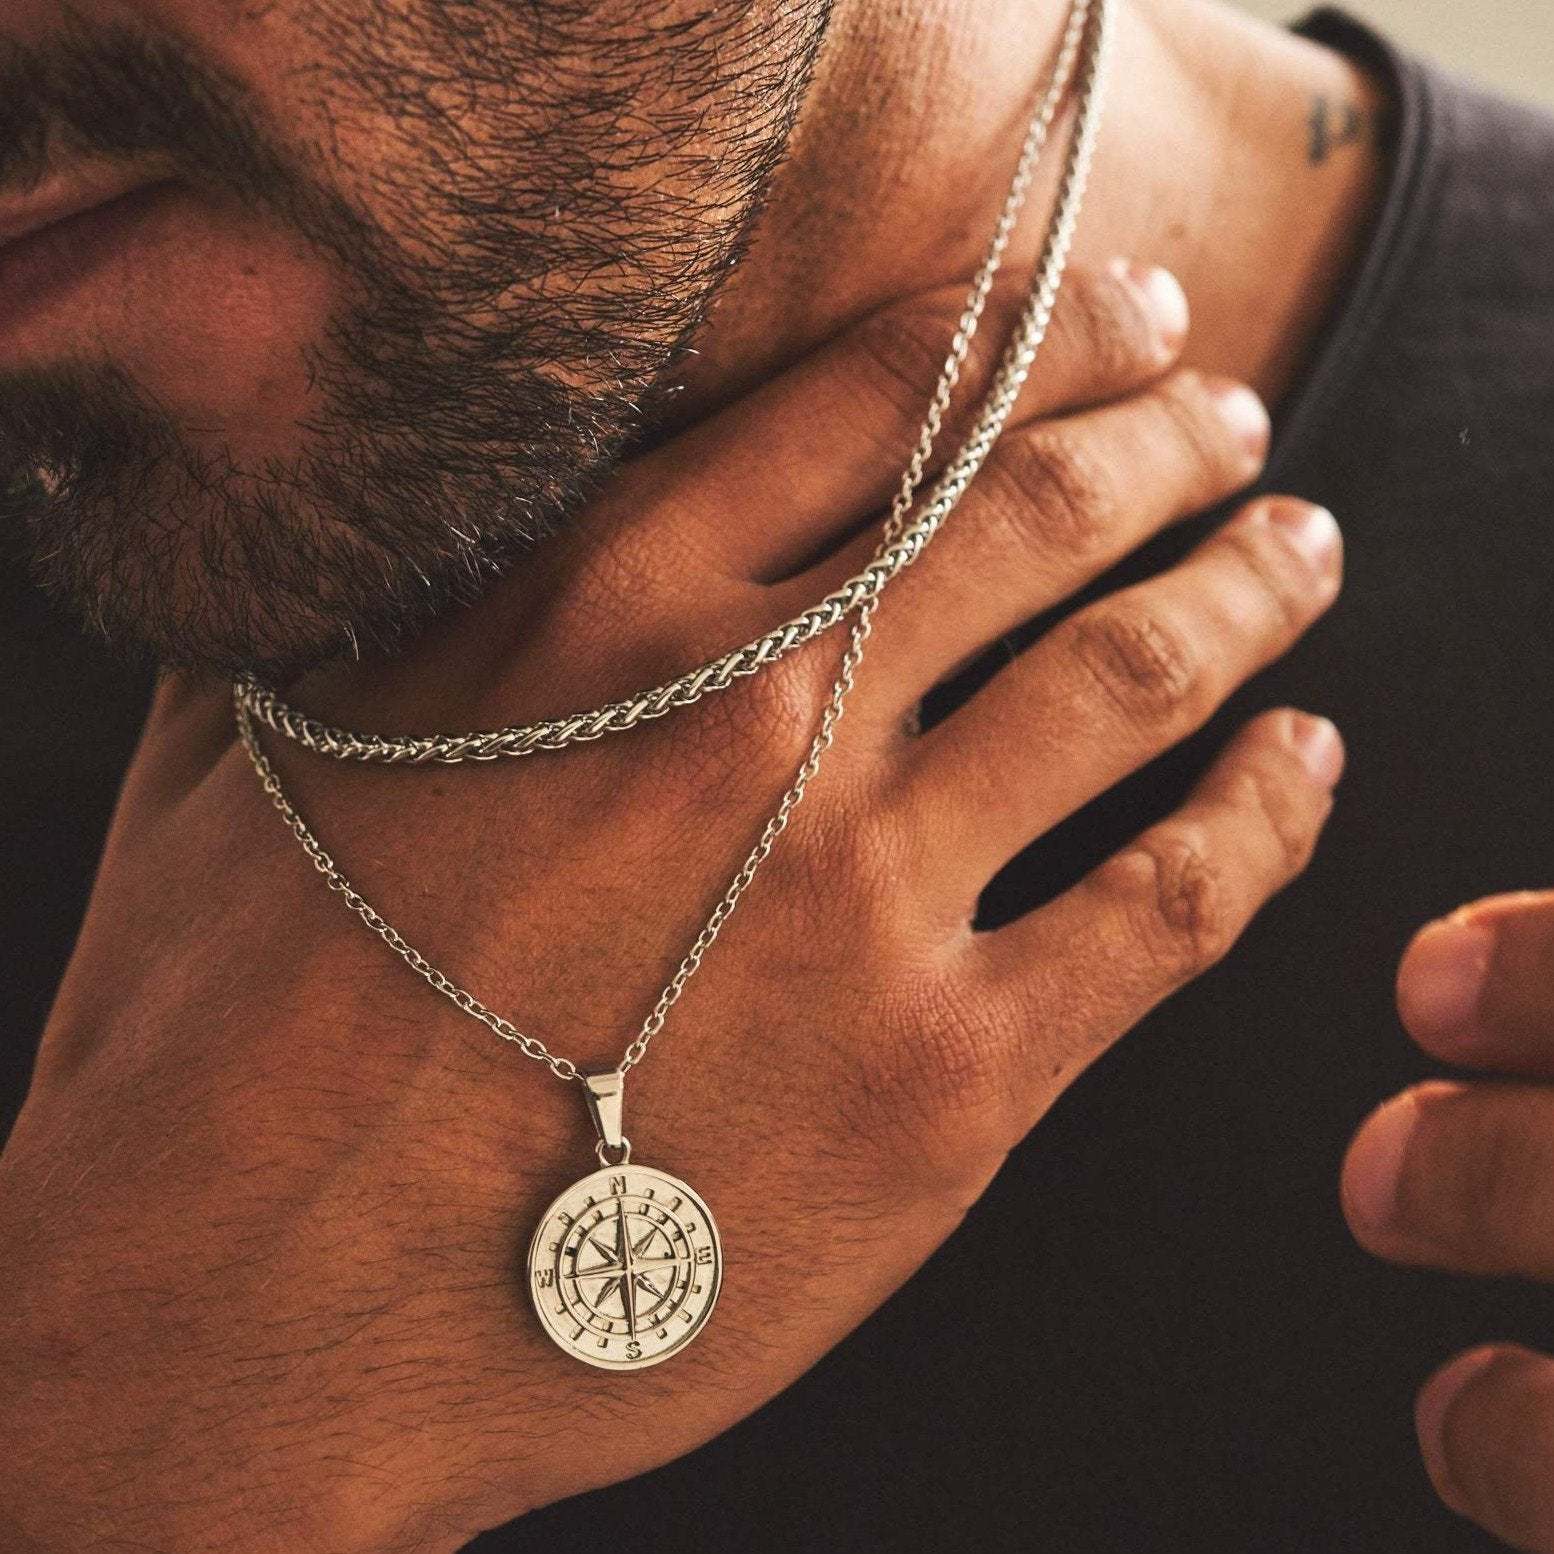 VVS Jewelry hip hop jewelry Silver Wheat Chain VVS Jewelry Compass Pendant Necklace